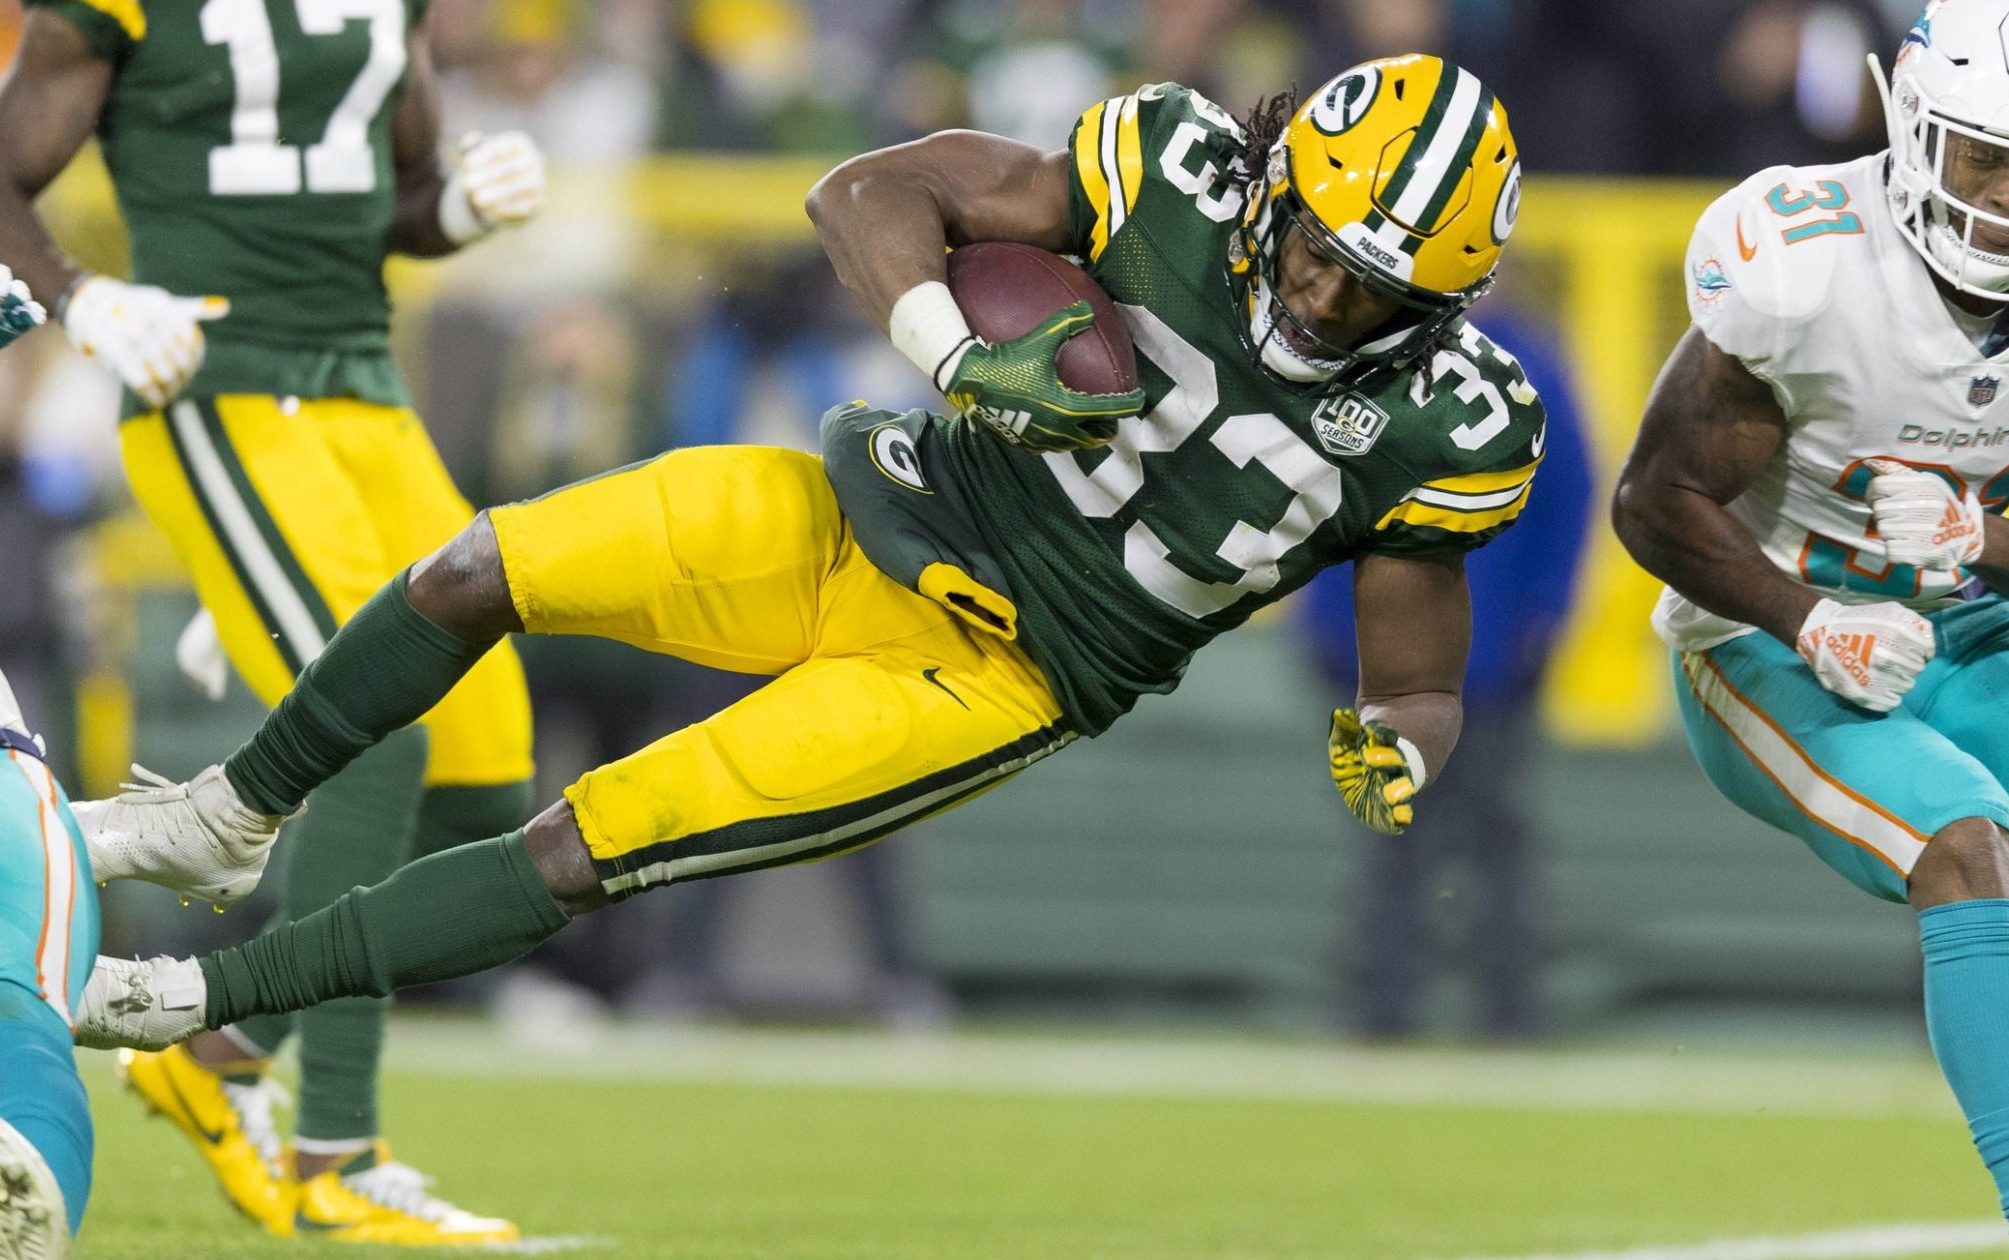 Packers vs. Dolphins: Preview, Prediction - The 3rd Man In - The 3rd Man In